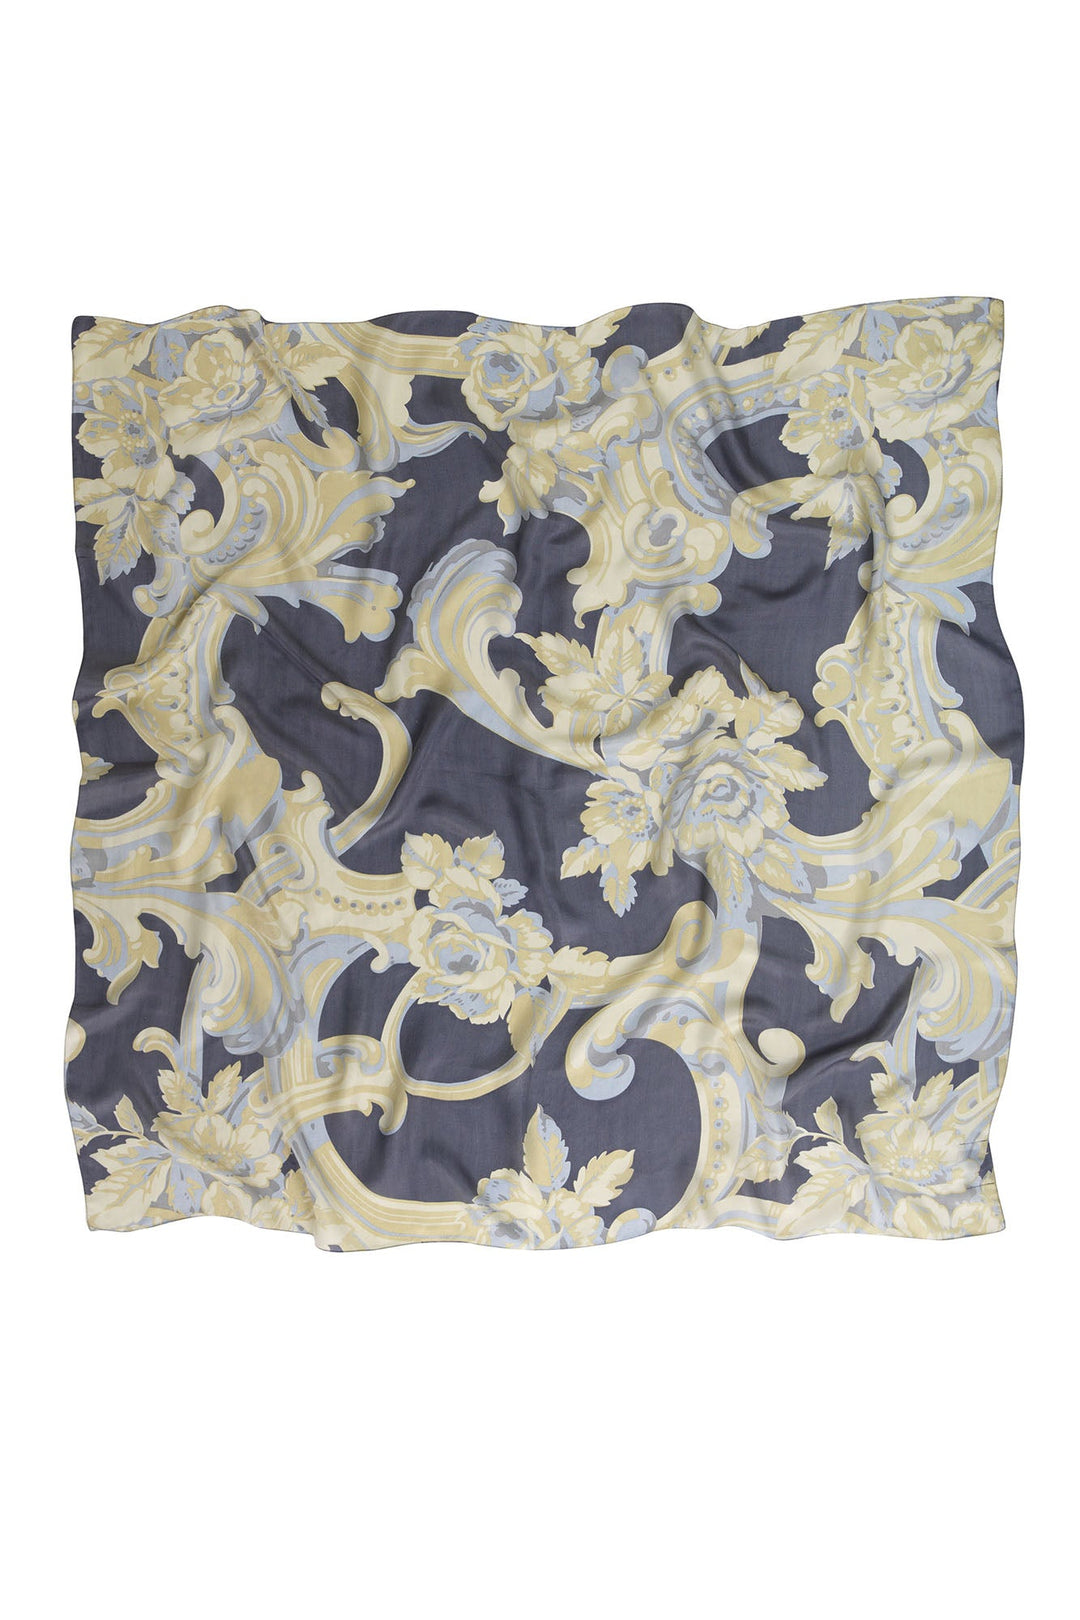 One Hundred Stars Plaster Roses Midnight Silk Scarf- 100% silk, 100% hand screen printed and a whole 100cm x 100cm of print, this silk scarf oozes luxury whether you wear it knotted around your neck, as a headscarf or fastened around the handle of your favourite handbag.